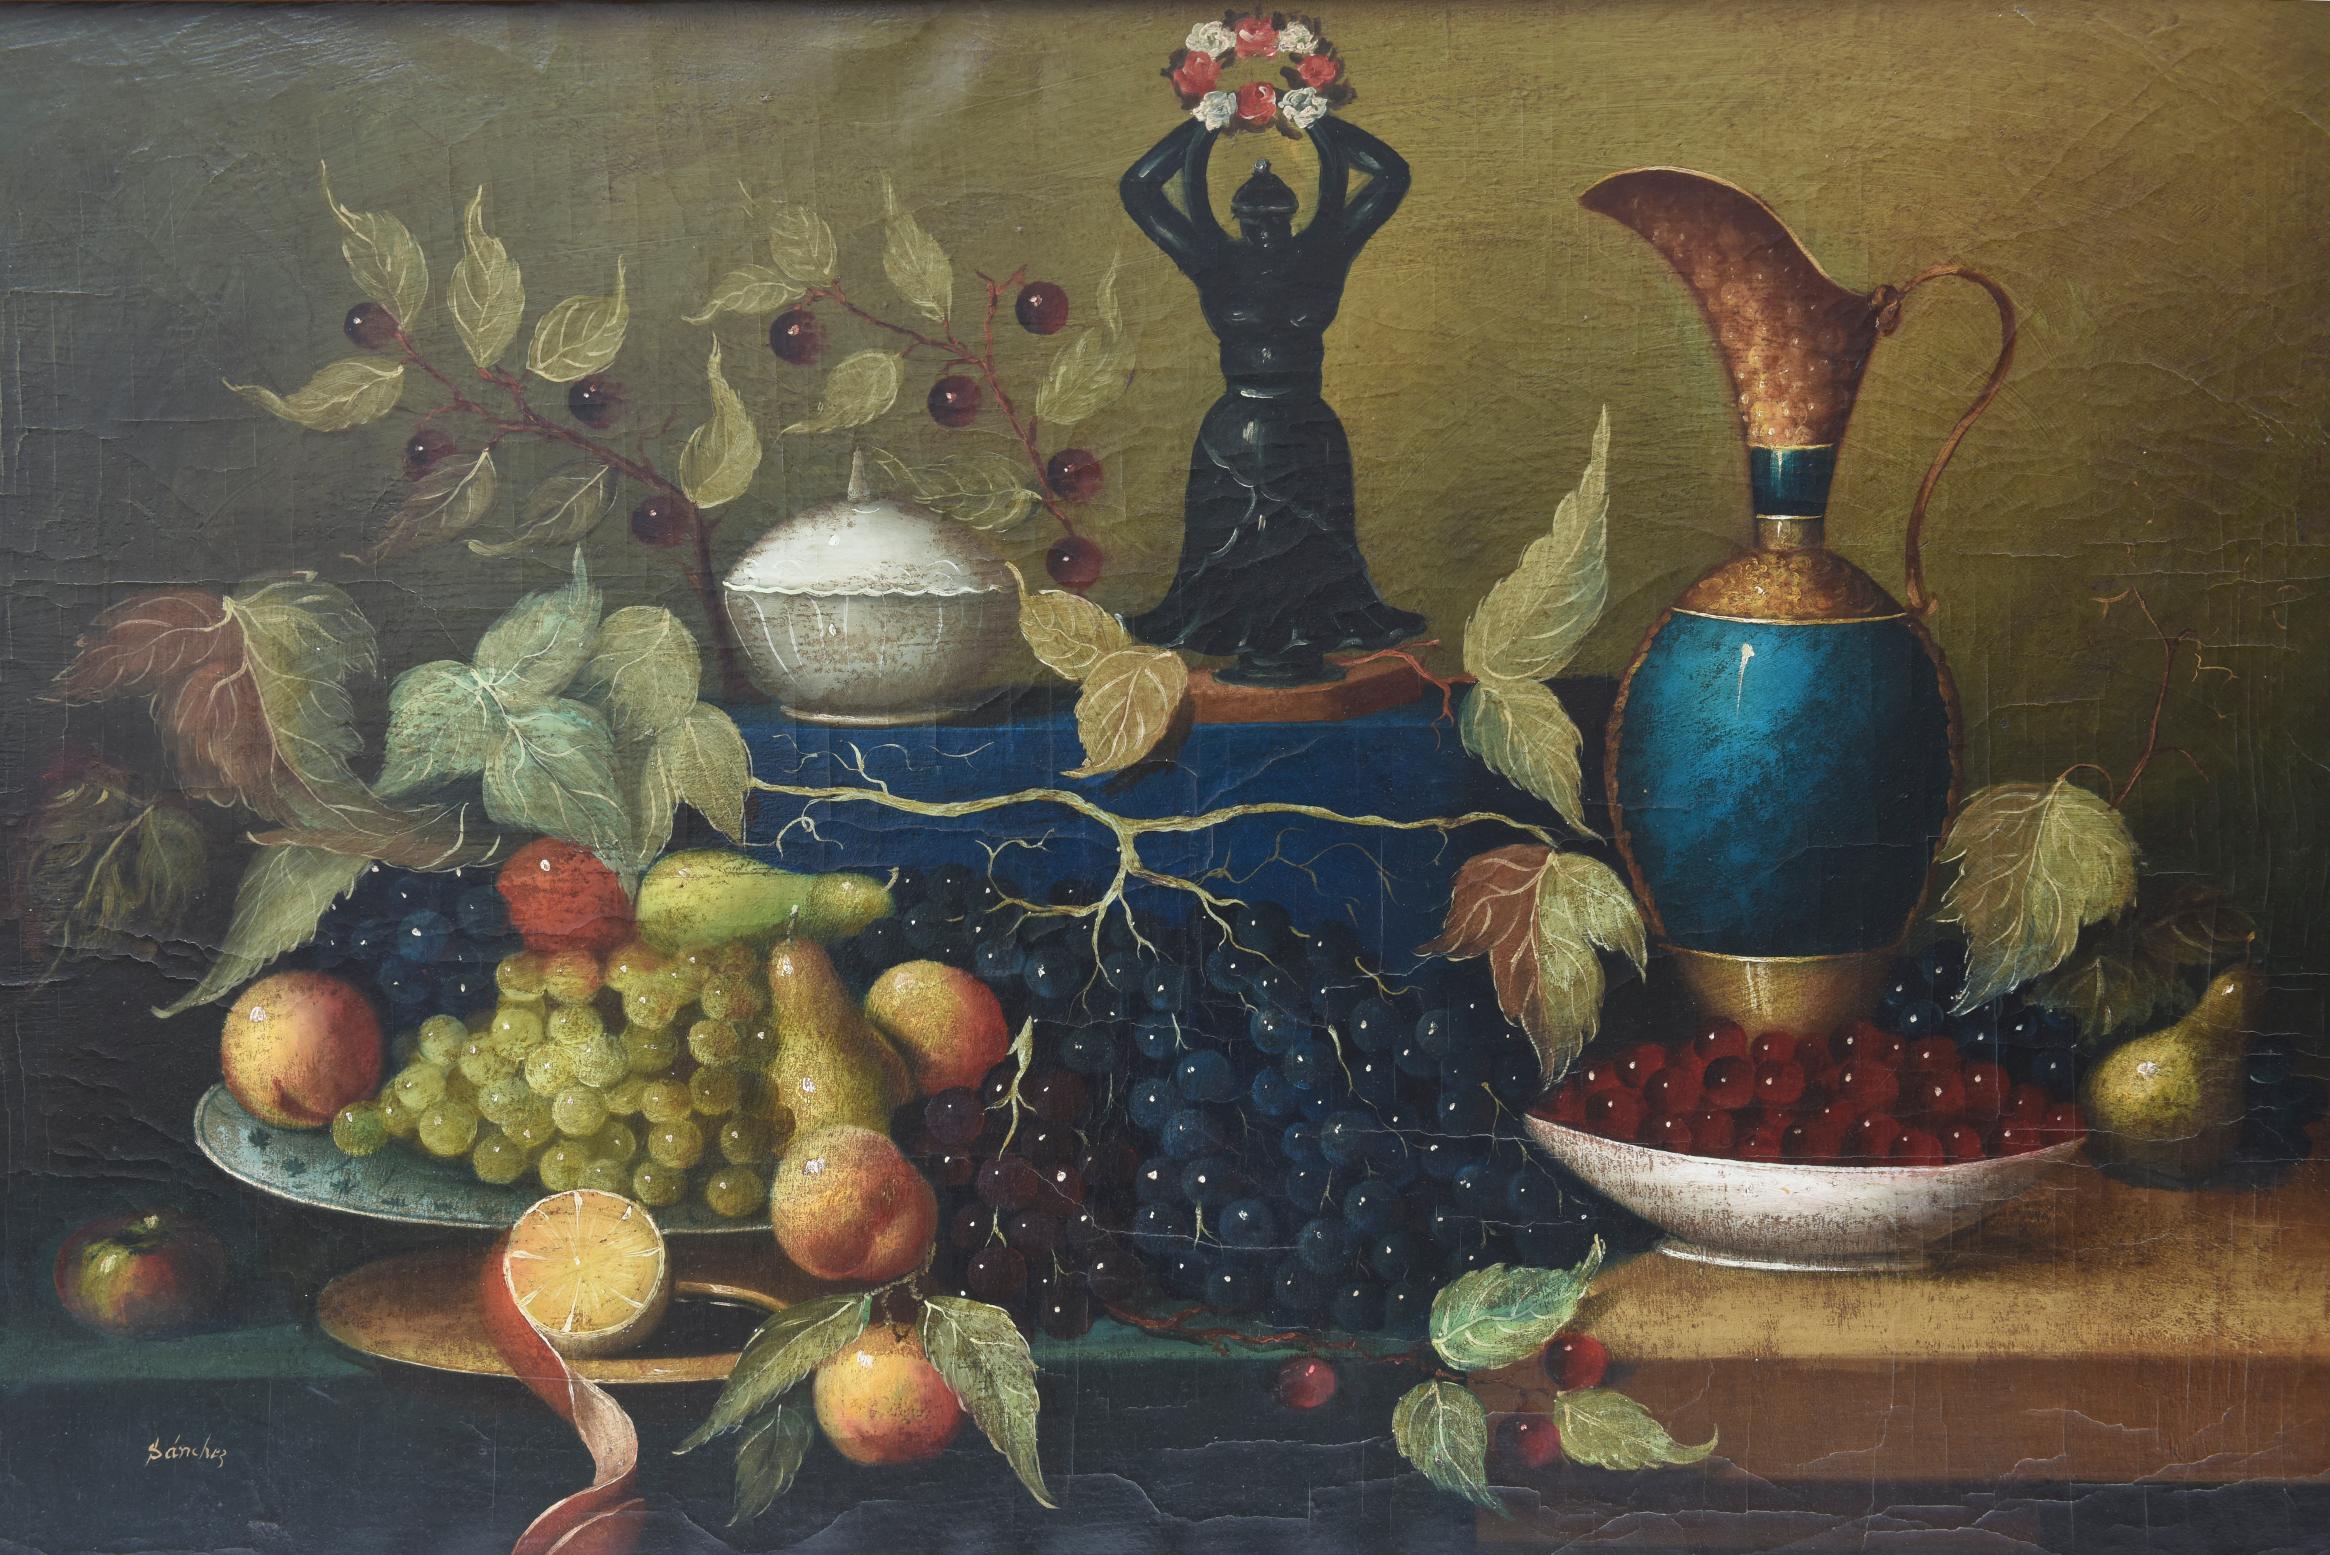 A fresh and vibrantly painted oil on canvas, signed lower left hand corner. Newly re-framed and when peeled back reveals the older canvas and original condition. The pretty scene features lush fruits, porcelain objects and figurines. Please see the